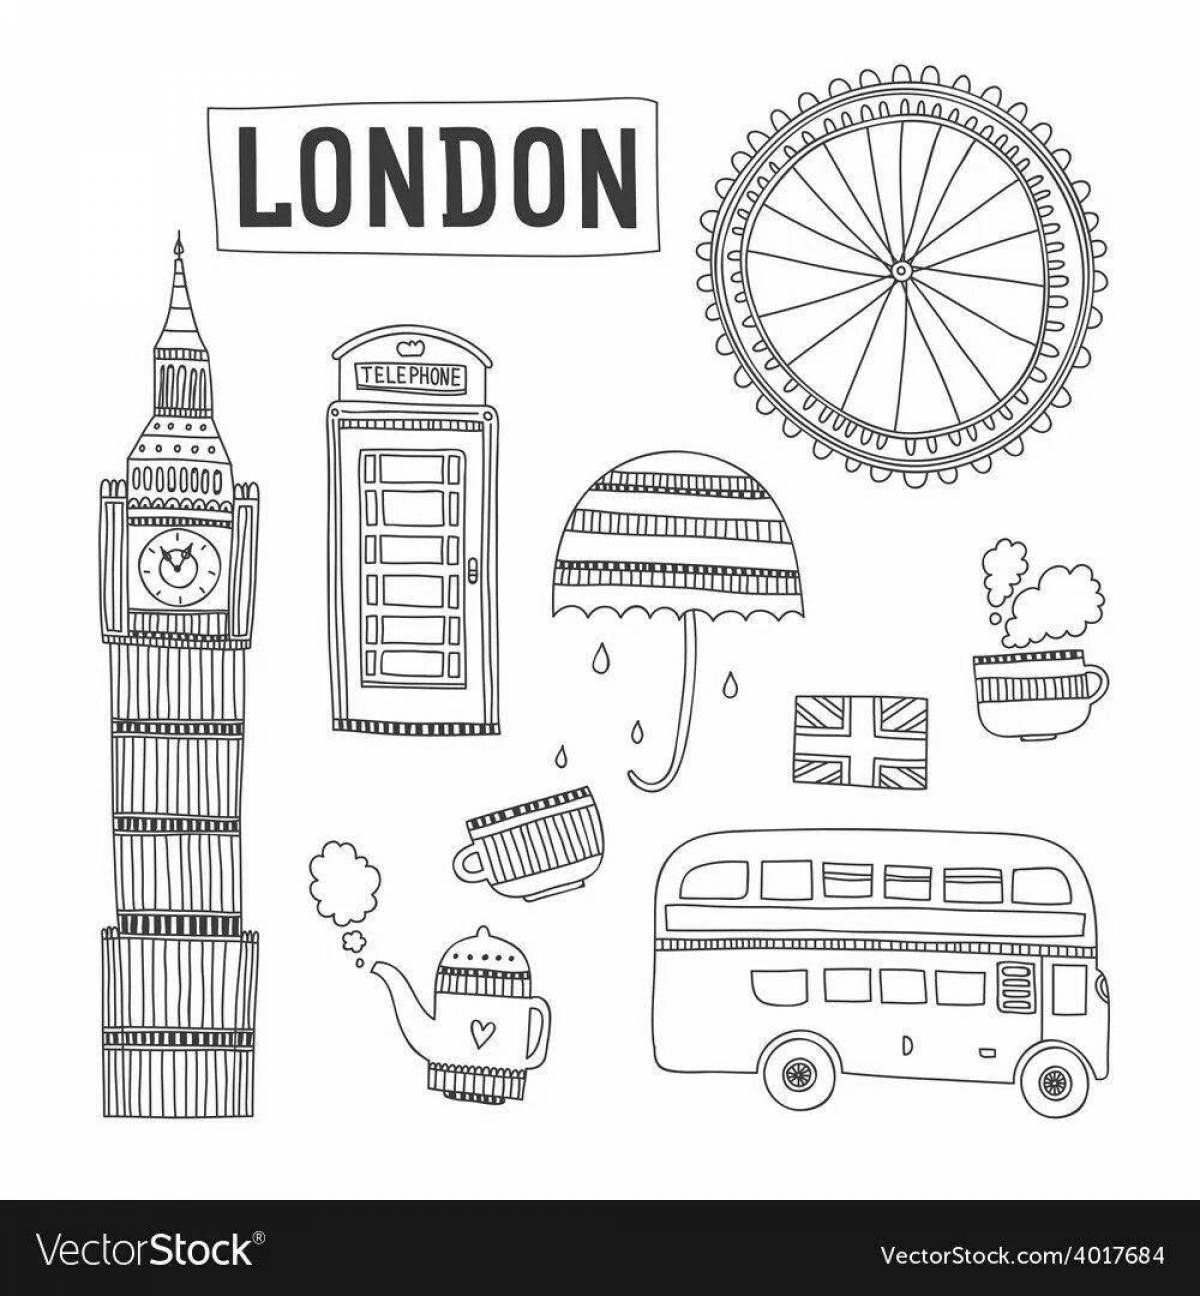 Fancy coloring of london for kids